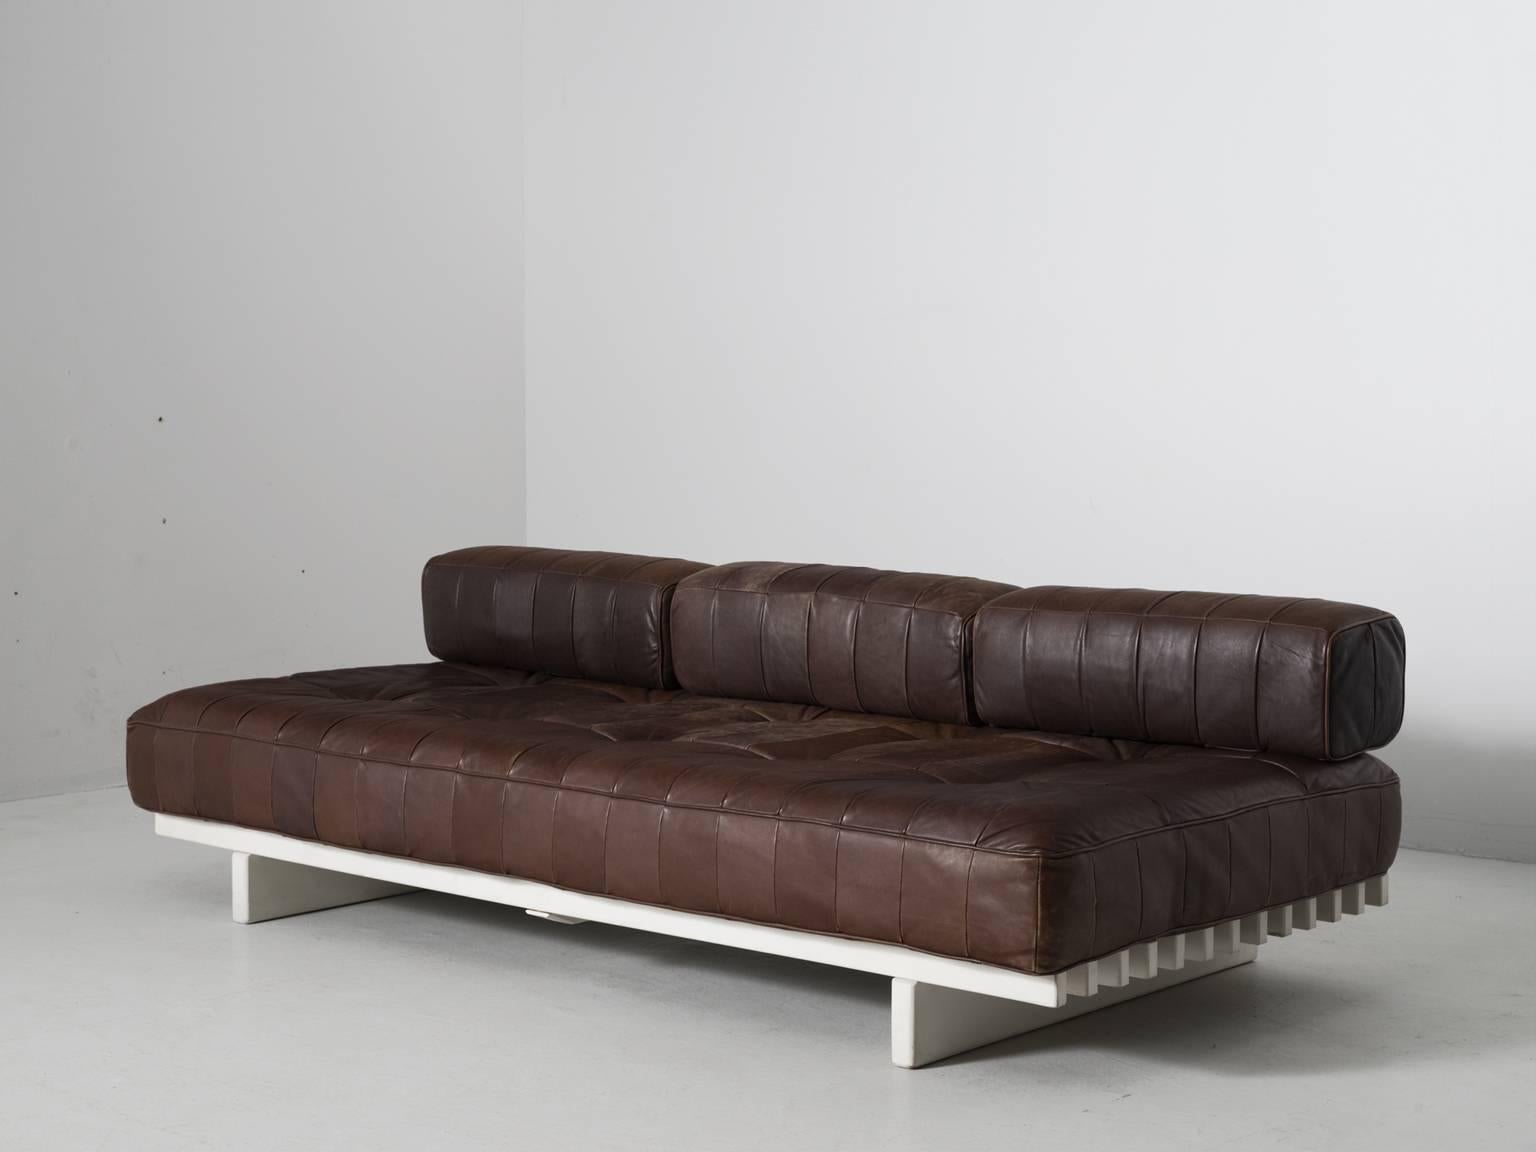 DS80 sofa, in leather and wood, by De Sede, Switzerland, 1970s. 

Daybed by the Swiss quality manufacturer De Sede. The frame consists of white lacquered wooden slats. The cushions are upholstered with brown leather in patchwork pattern. The